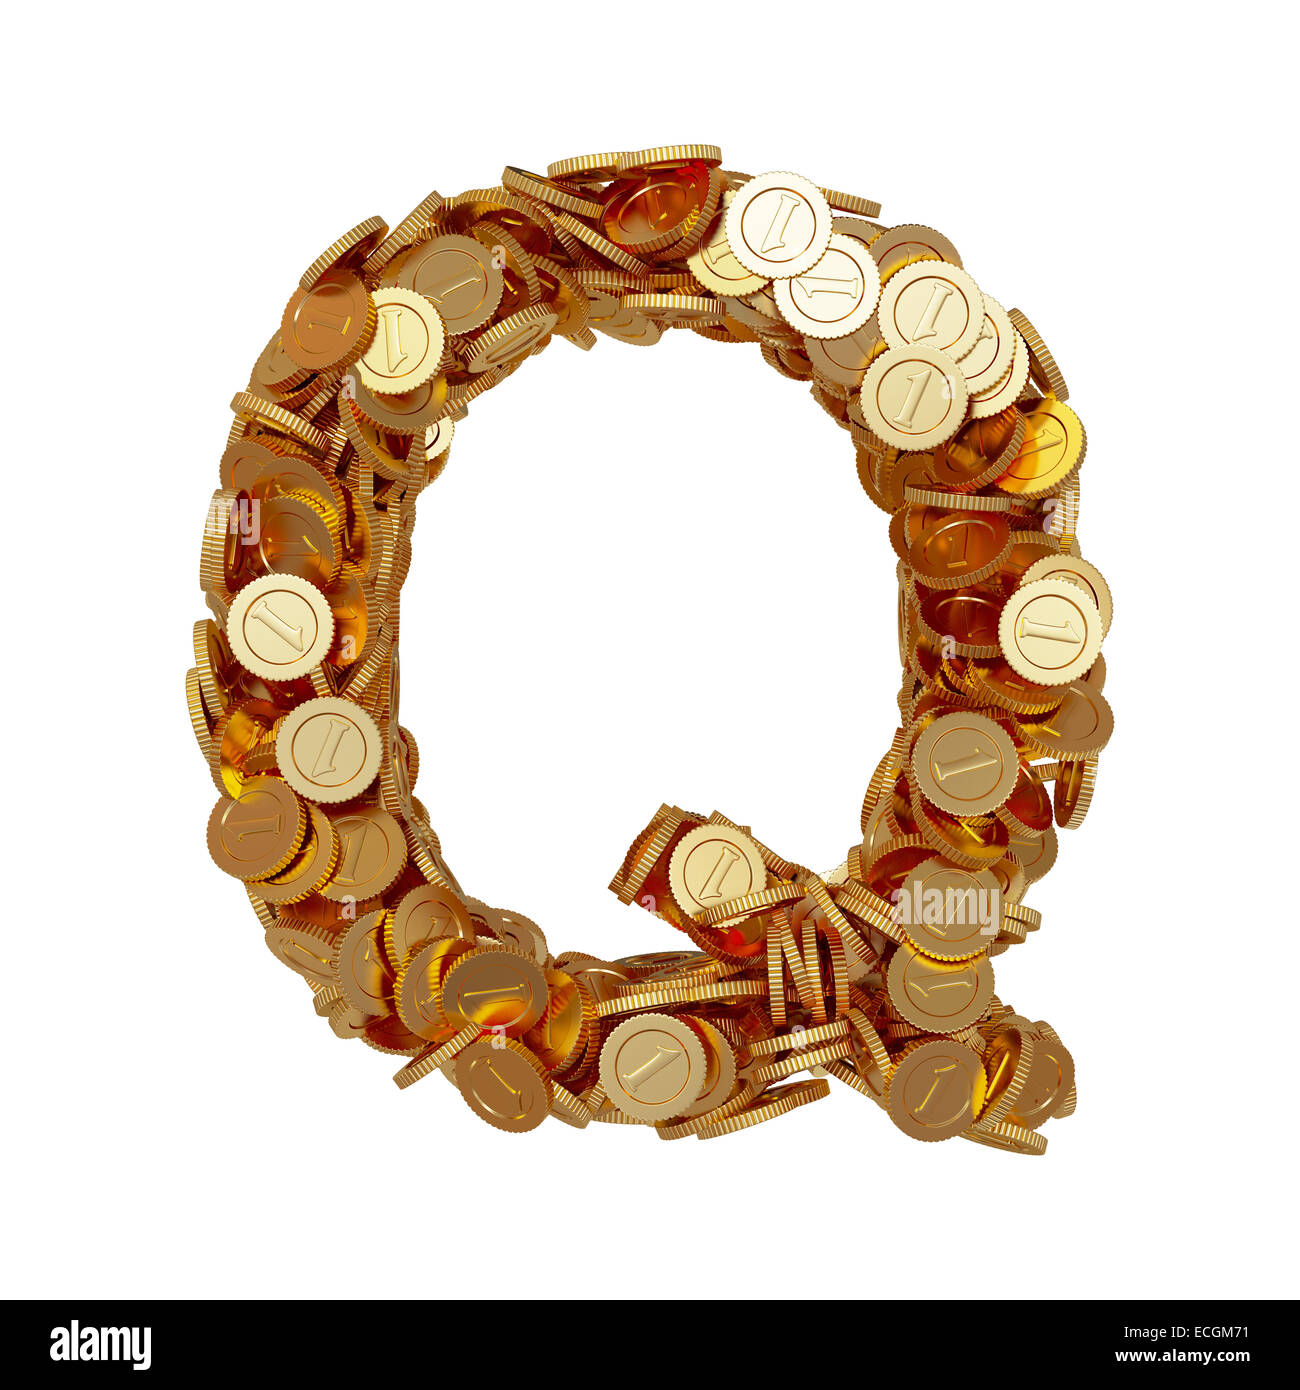 3d illustration of alphabet letter Q with golden coins isolated on white background Stock Photo